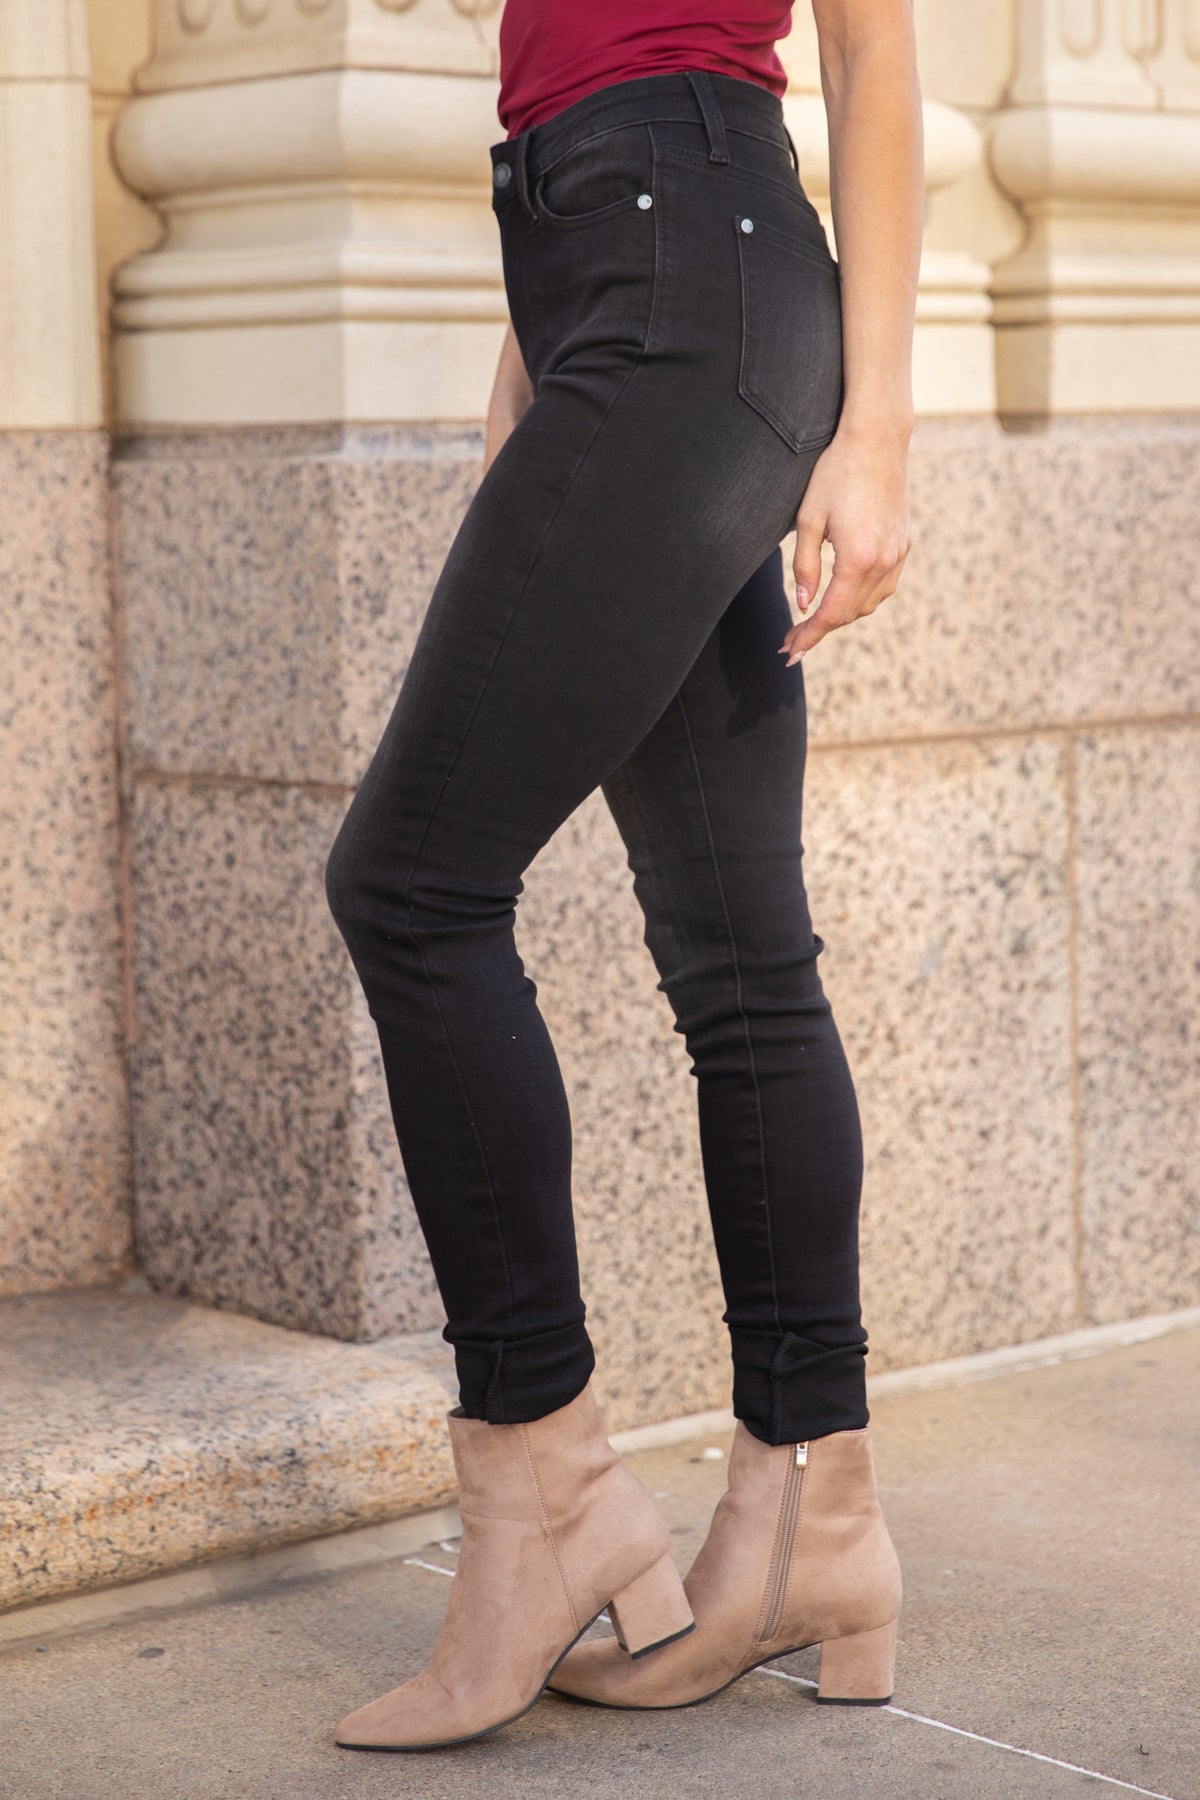 Judy Blue Black High Rise Skinny Jeans - Filly Flair